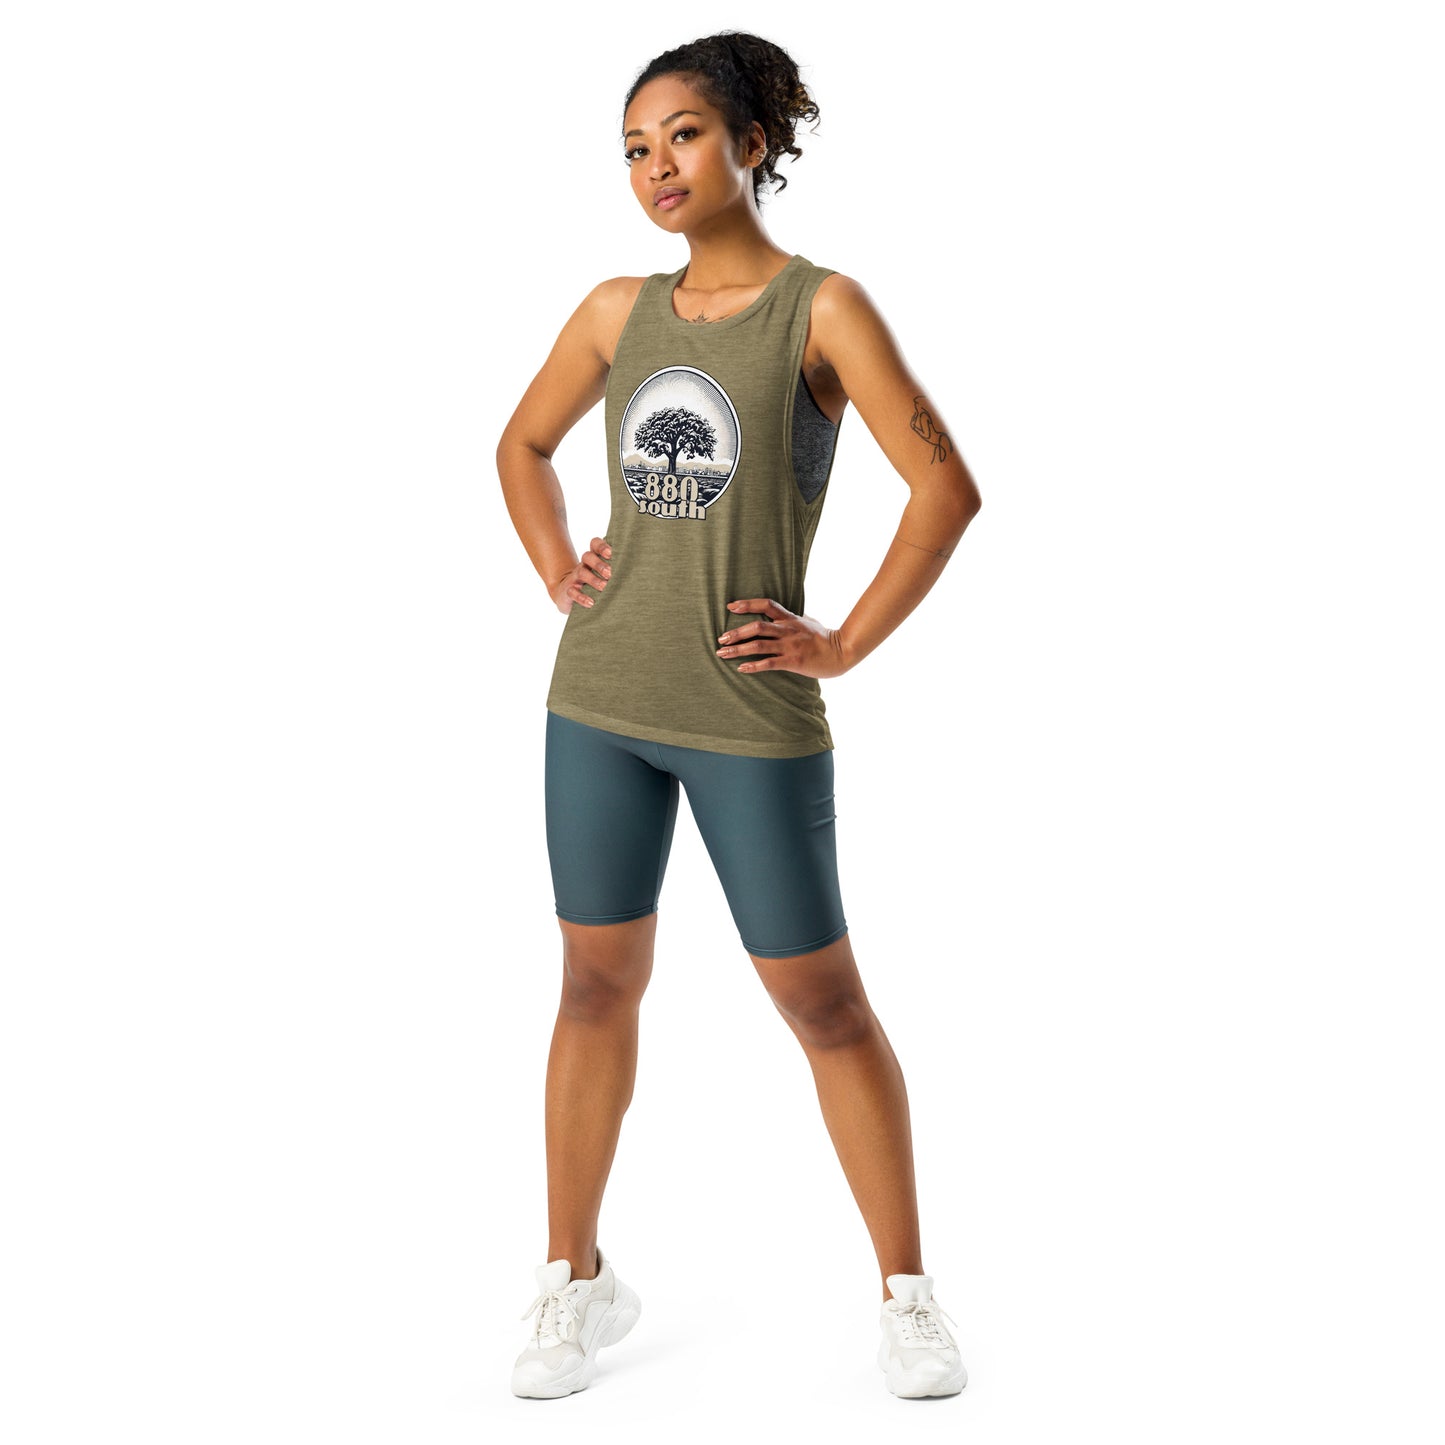 880 South Orchard City - Ladies’ Muscle Tank